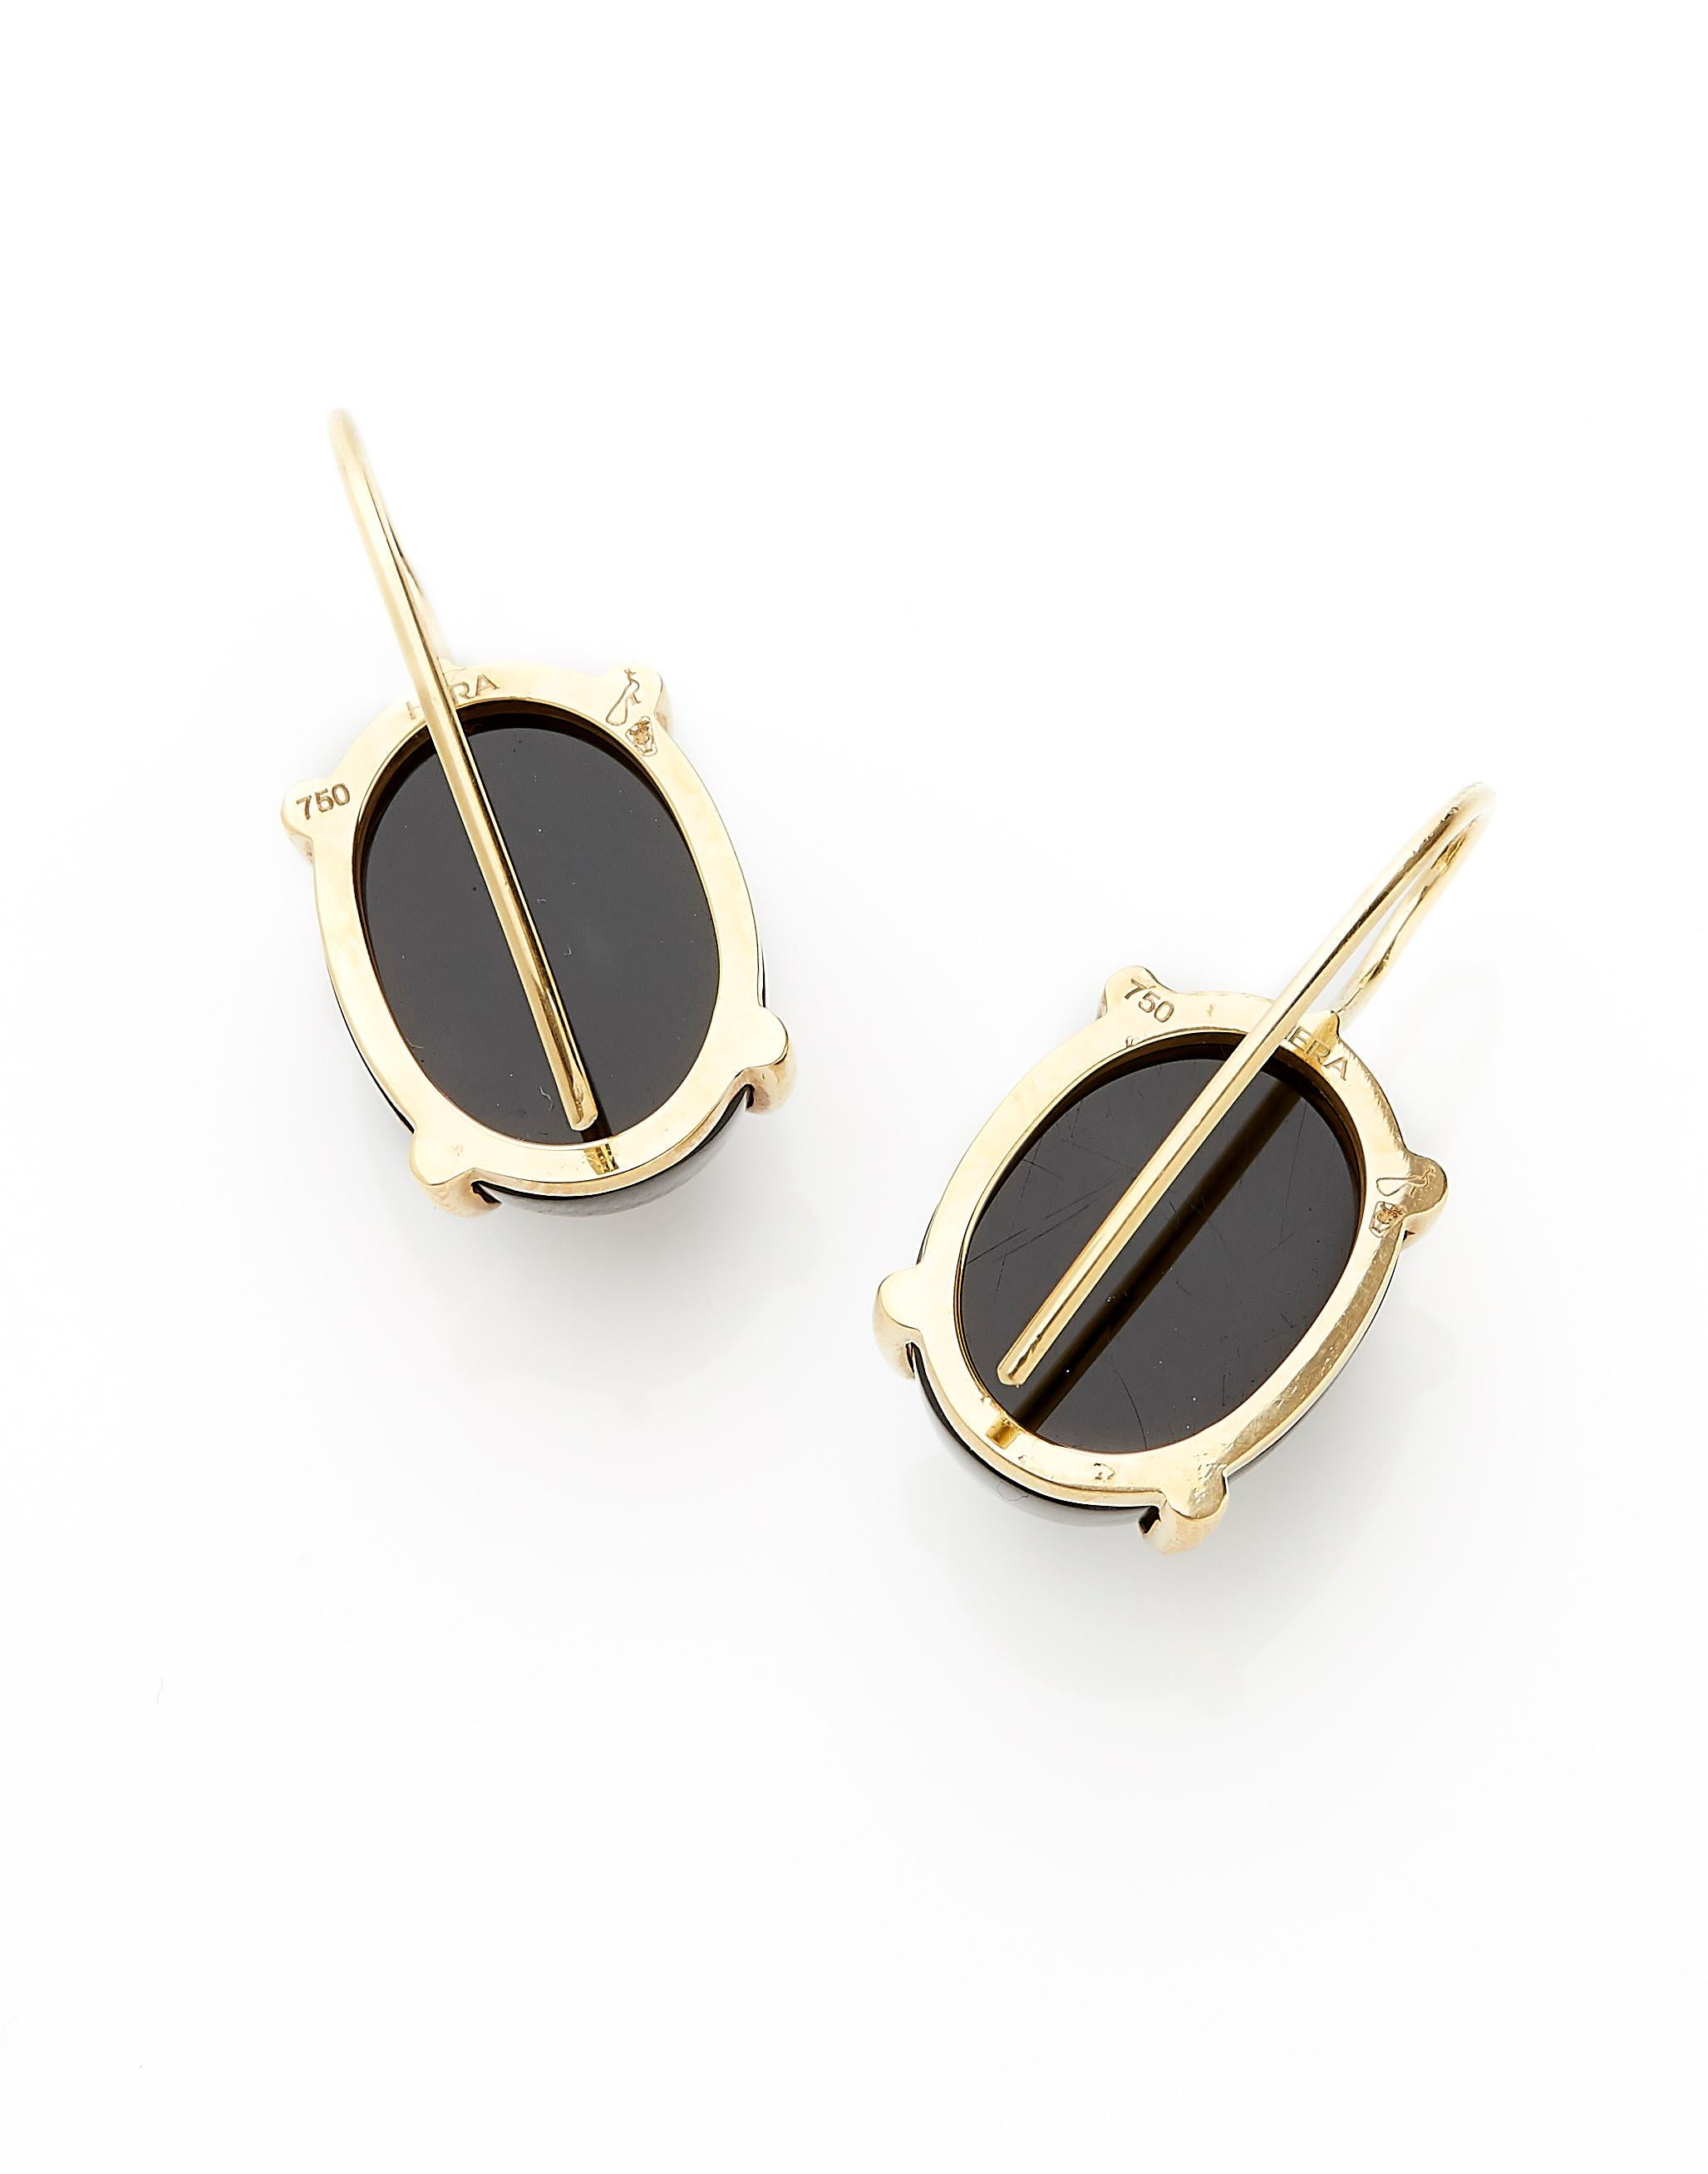 Contemporary 18 Karat Yellow Gold Drop Earrings Set with 36.05 Carat Oval Cabochon Cut Onyx For Sale